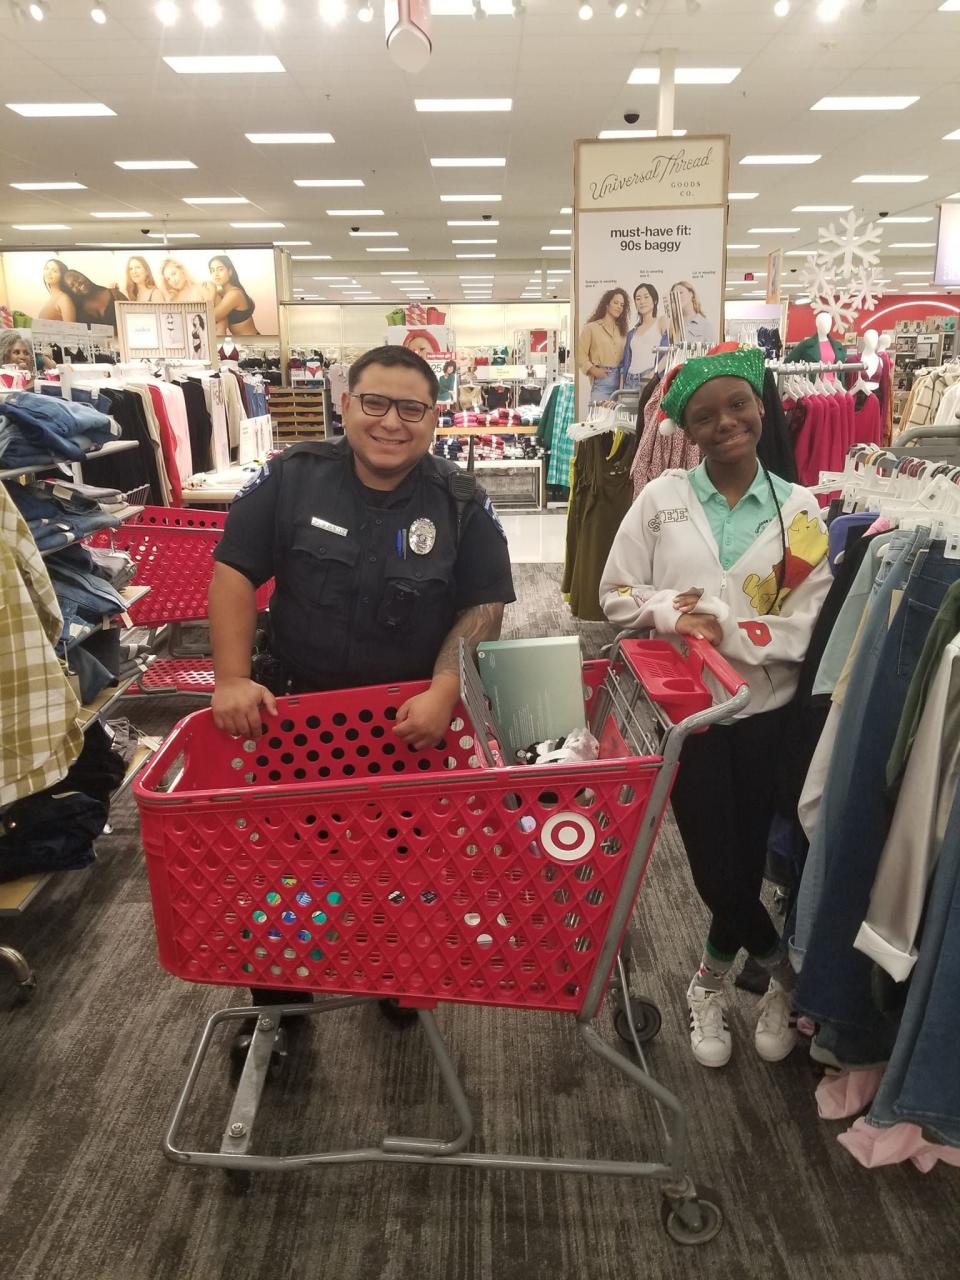 Women of the Glorious Hands, Inc. were treated to a $100 Shopping Spree for the girls mentorship program as part of the Target Heroes and Helpers Grant.